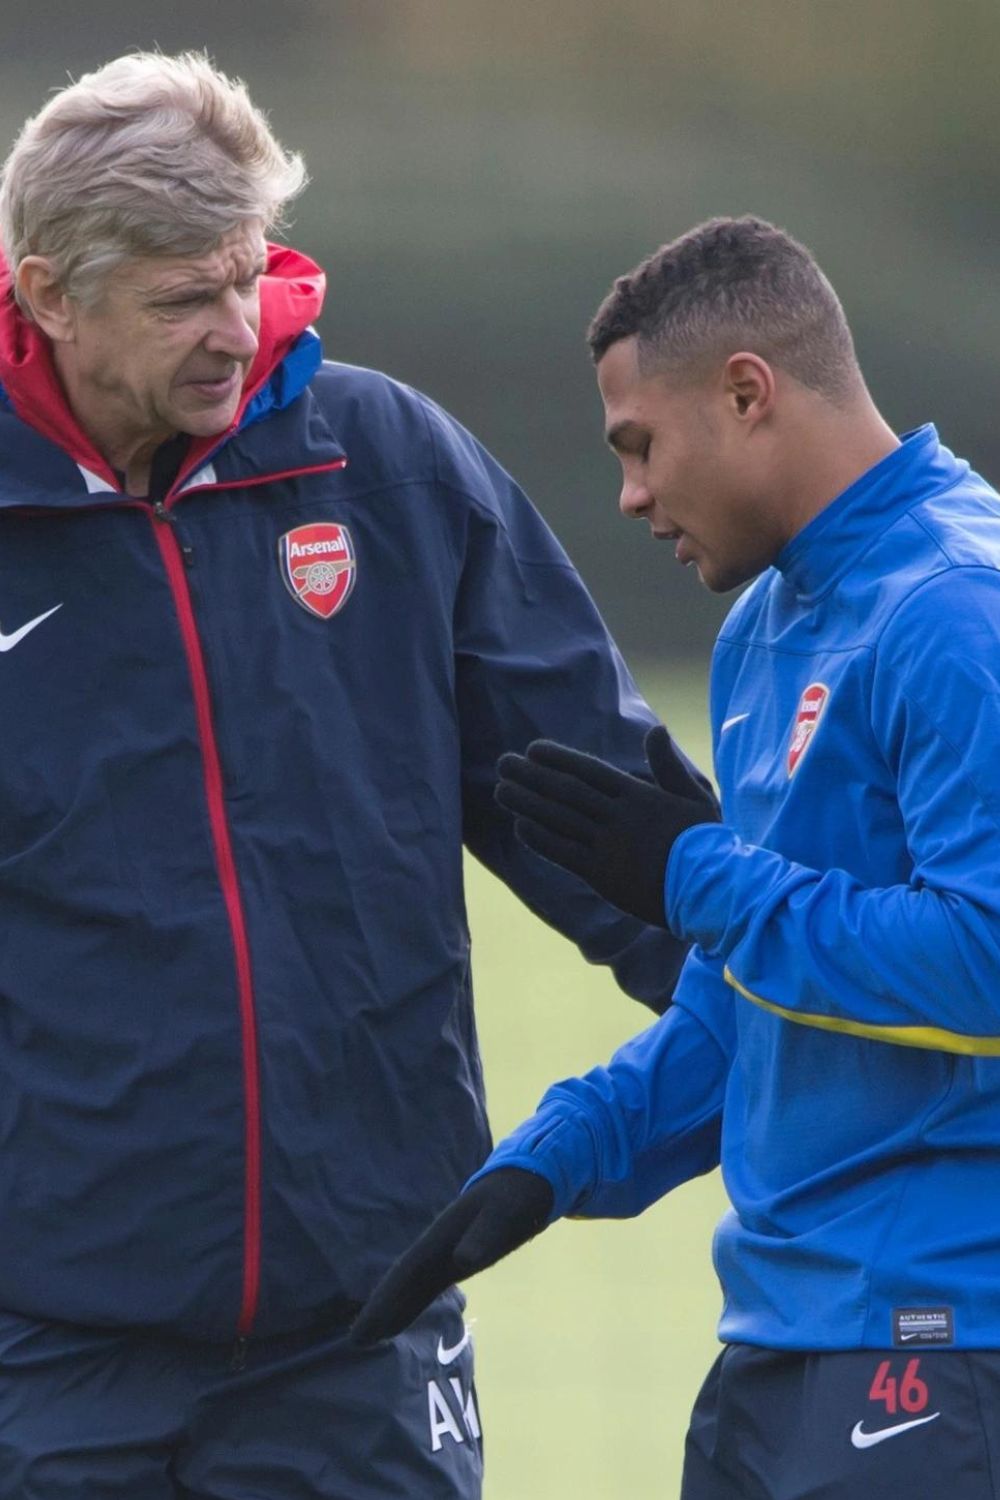 Serge Gnabry With Arsenal's The-Manager, Arsene Wenger (Source sports.com)